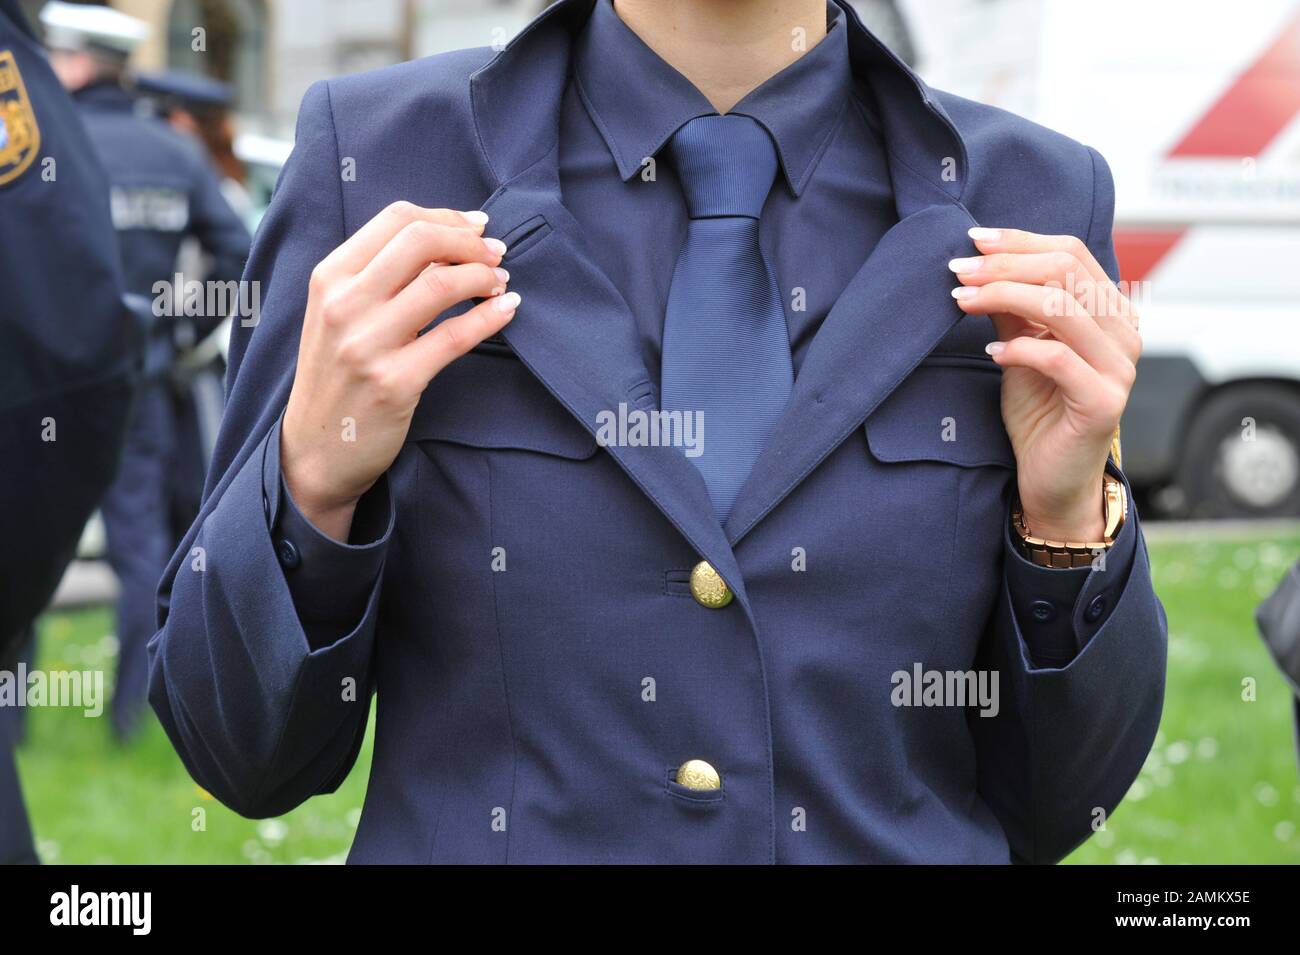 Police officers from Nuremberg present a new uniform collection to the Bavarian Ministry of the Interior in Munich. The proposals for the new uniforms consist of existing uniforms from Austria, Baden-Wuerttemberg and Saxony-Anhalt and are to be tested by the Bavarian police from August onwards. [automated translation] Stock Photo